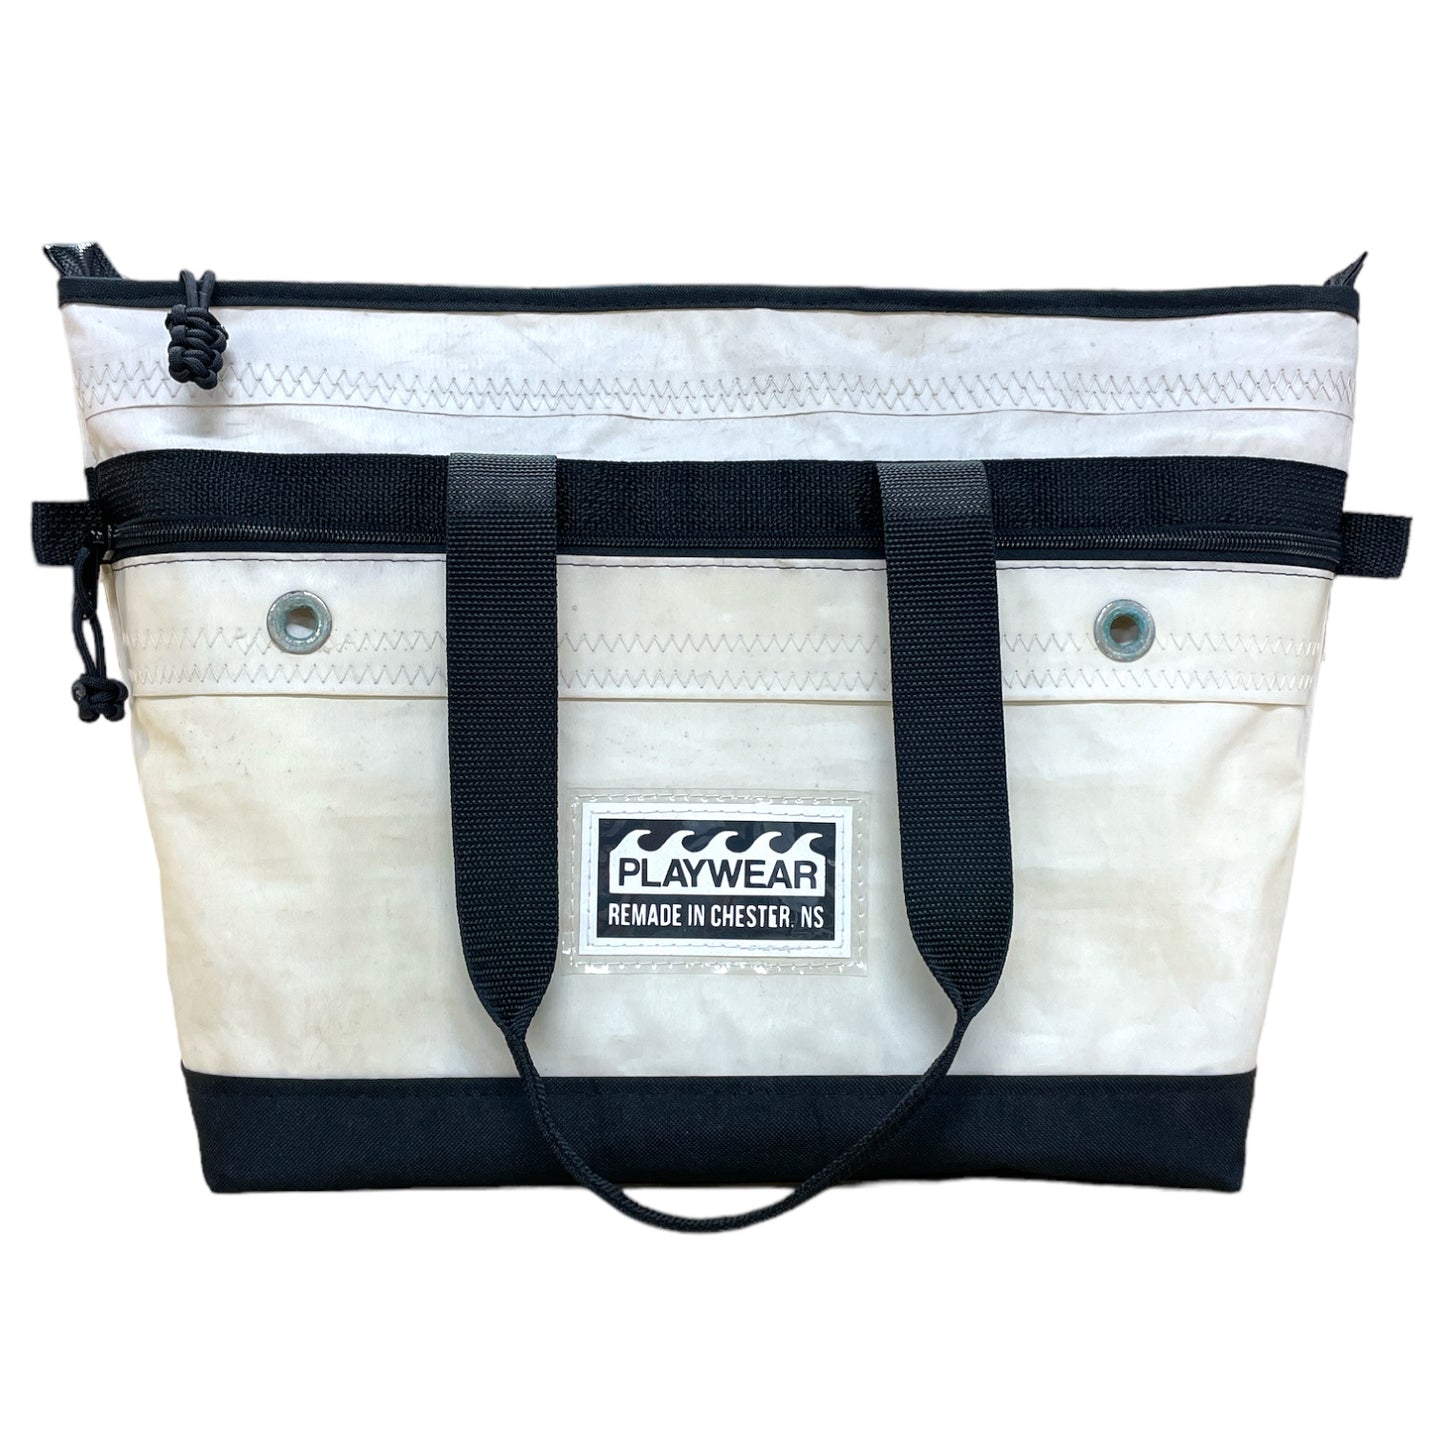 LARGE BOAT TOTE "CLOUDY"